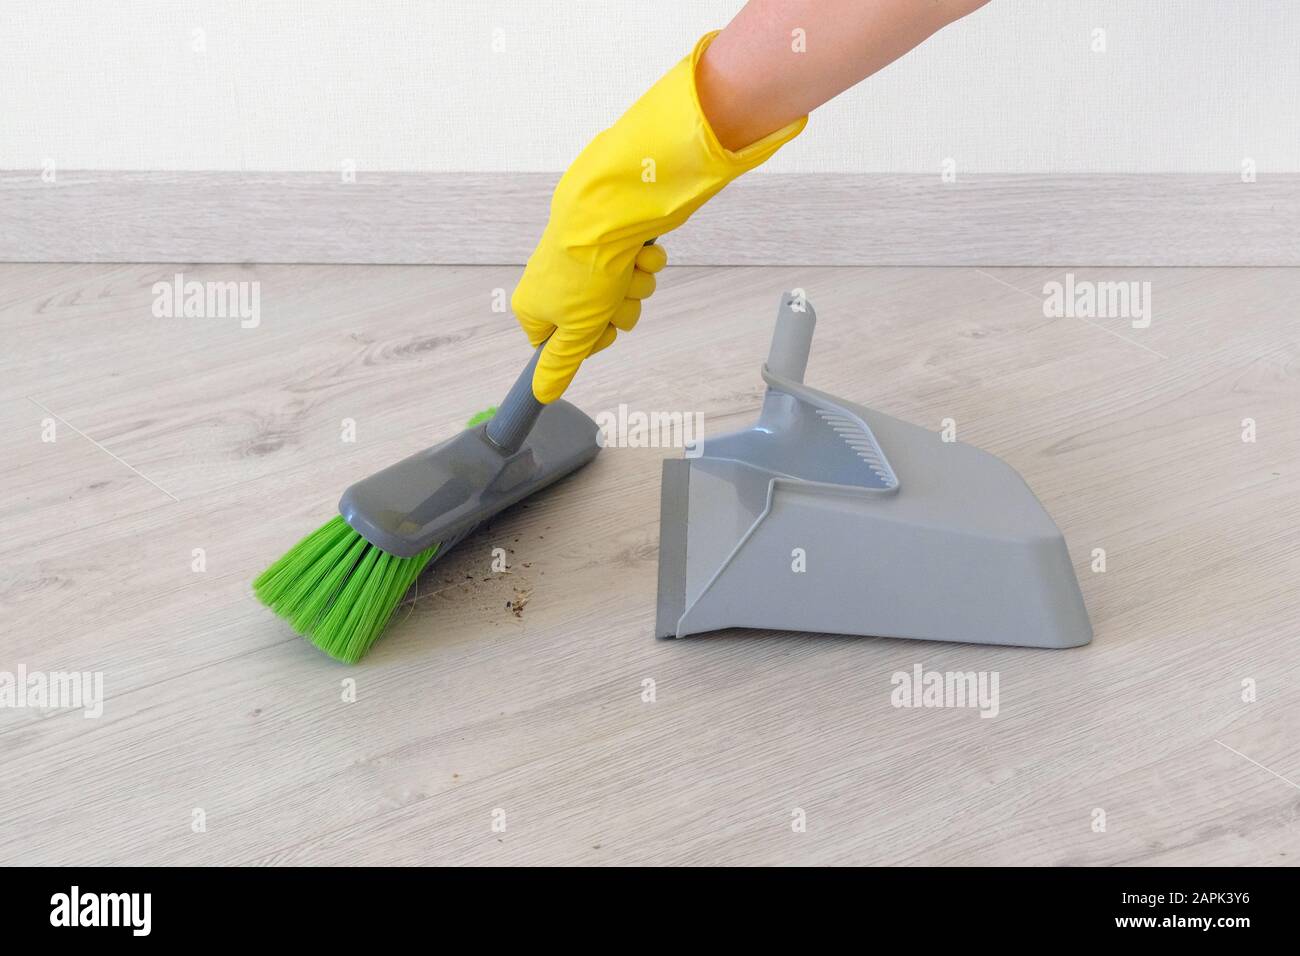 Cleaning Concept Female Hand In Yellow Rubber Glove Sweeping